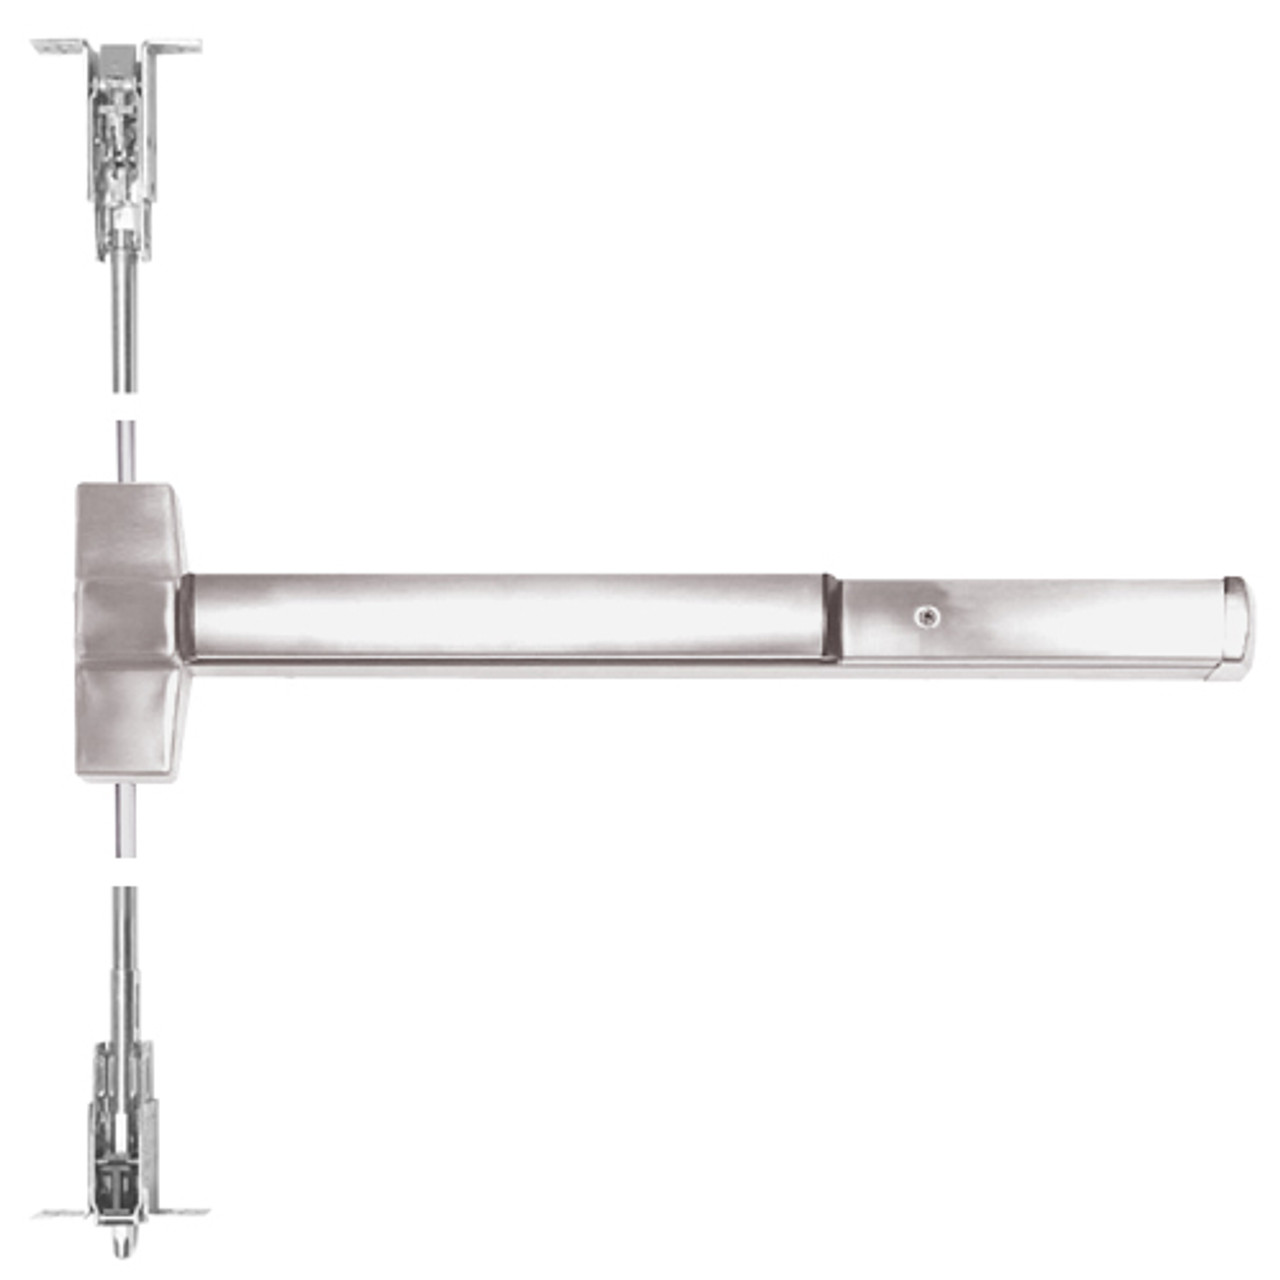 ED5860-630-W048-MELR Corbin ED5800 Series Non Fire Rated Concealed Vertical Rod Device with Motor Latch Retraction in Satin Stainless Steel Finish